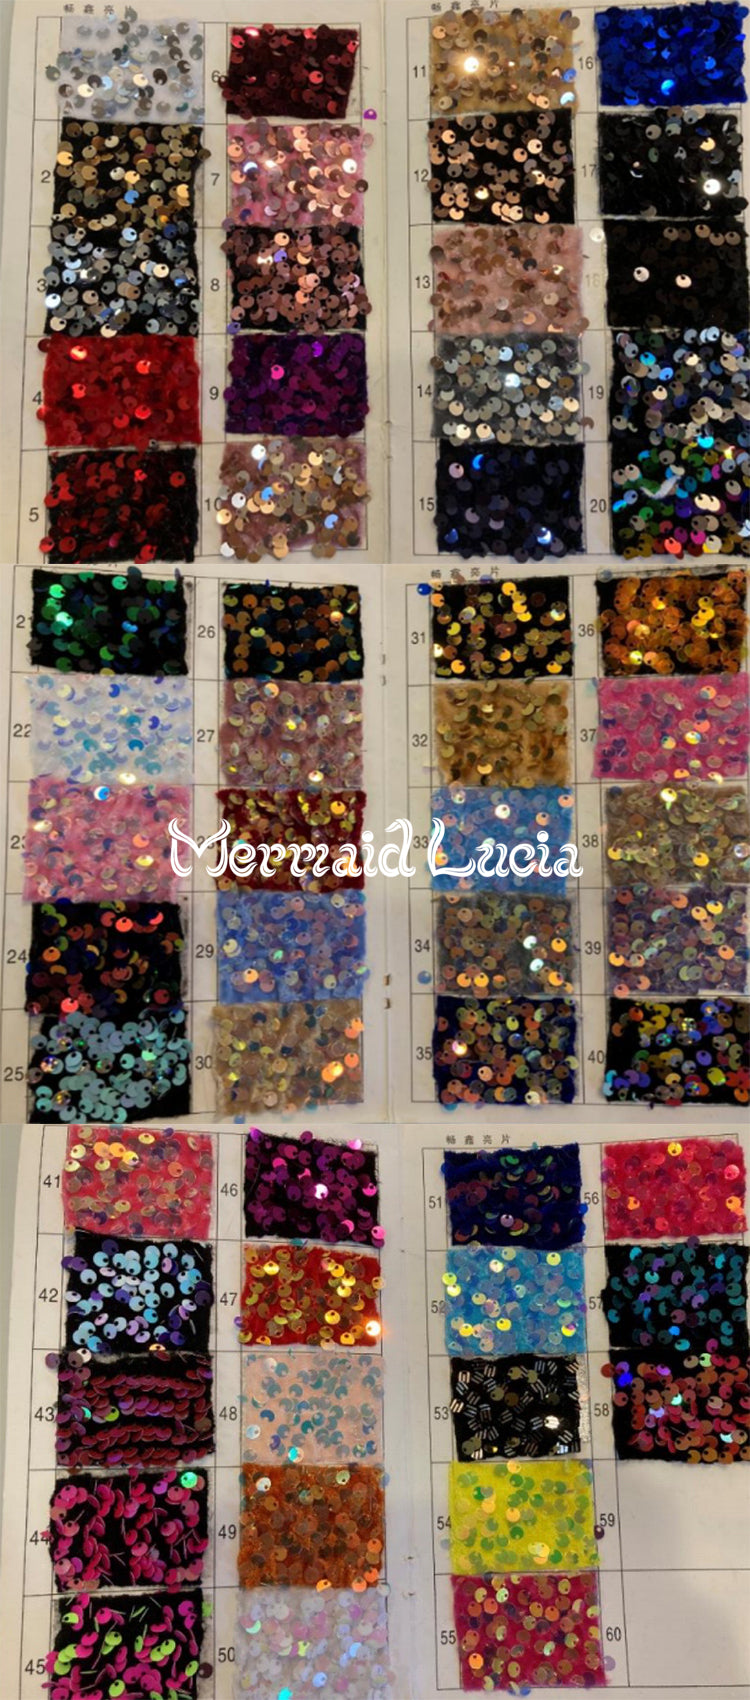 Mermaid Small Sequin Tail Color 4 Siliver